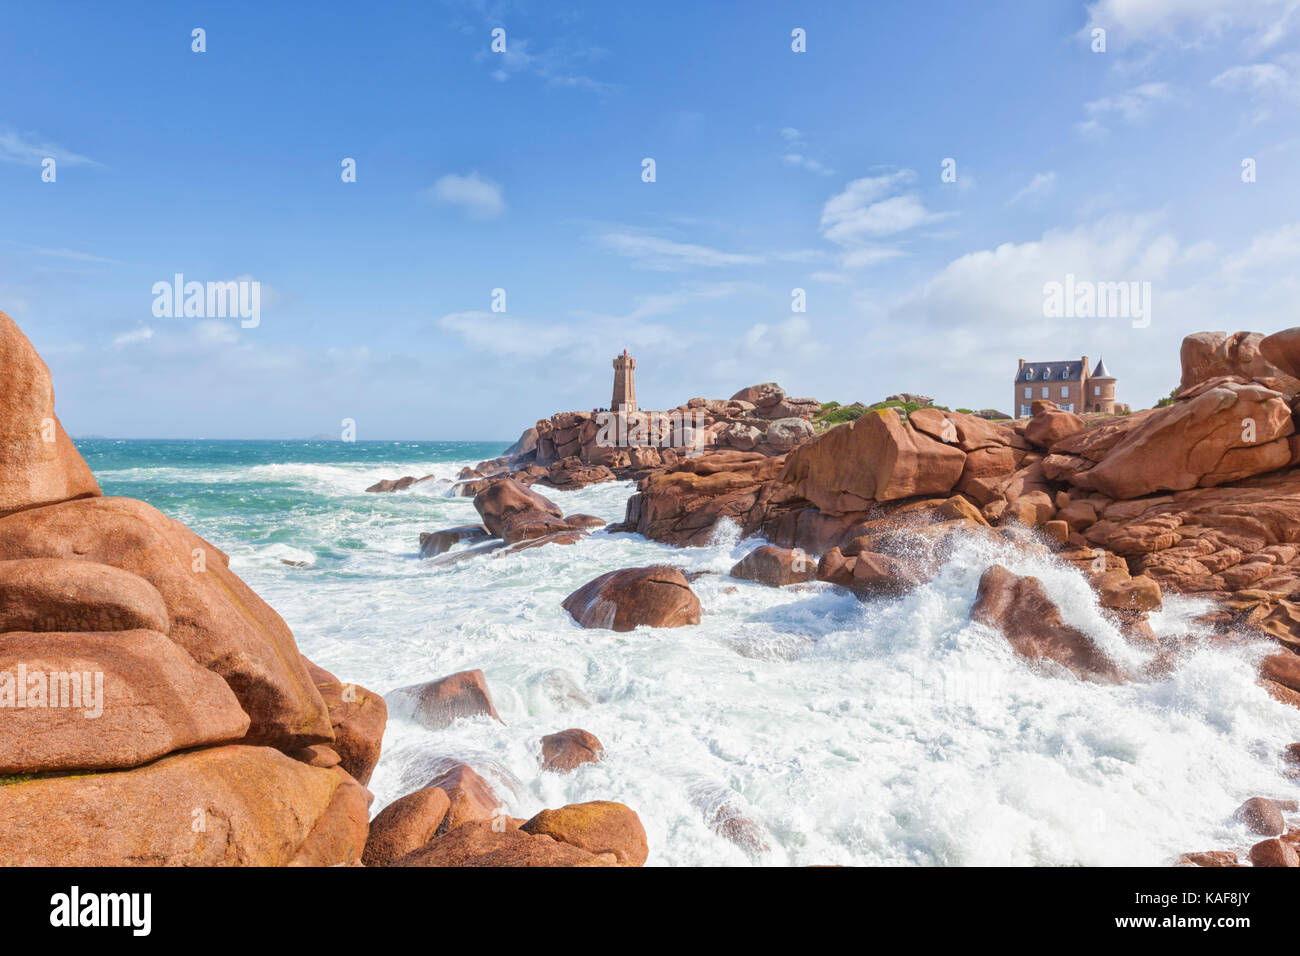 Ploumanach Mean Ruz lighthouse at pink granite coast, Perros-Guirec, Brittany, France. Stock Photo